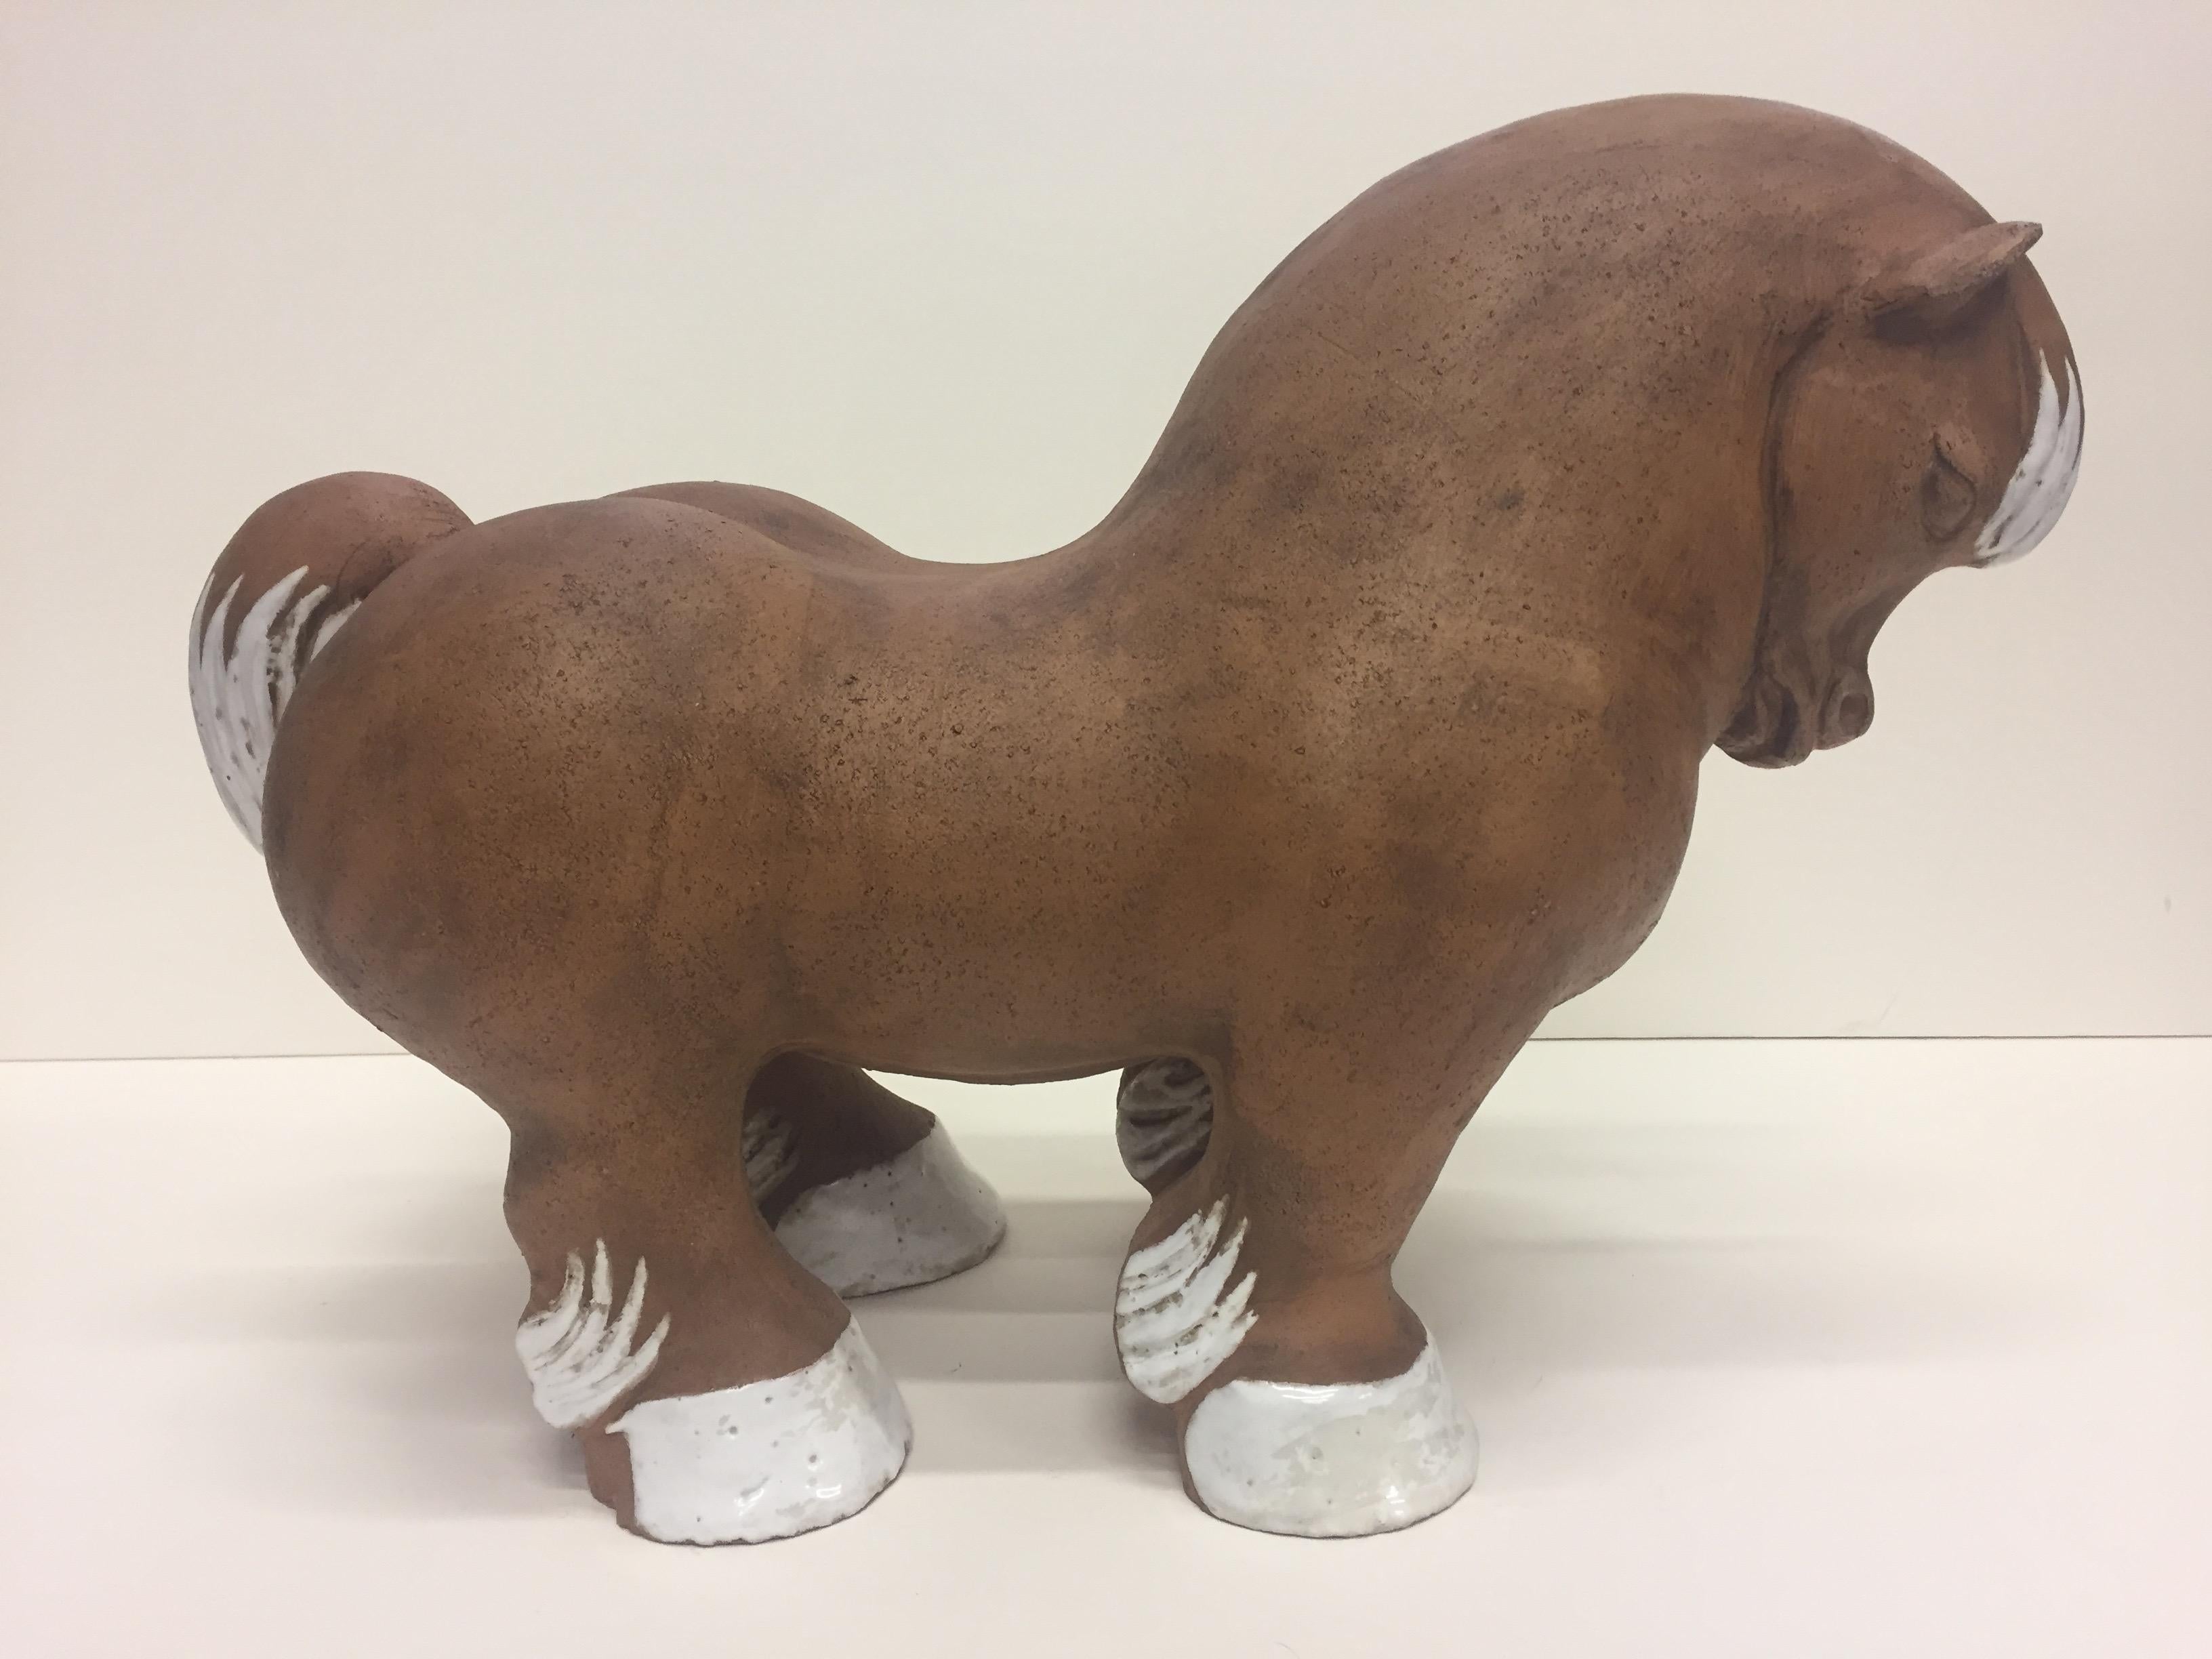 An eye-catching sensual terracotta sculpture of a horse in the style of Botero, with exaggerated curves and haunches, accented with white glazed mane and hooves.